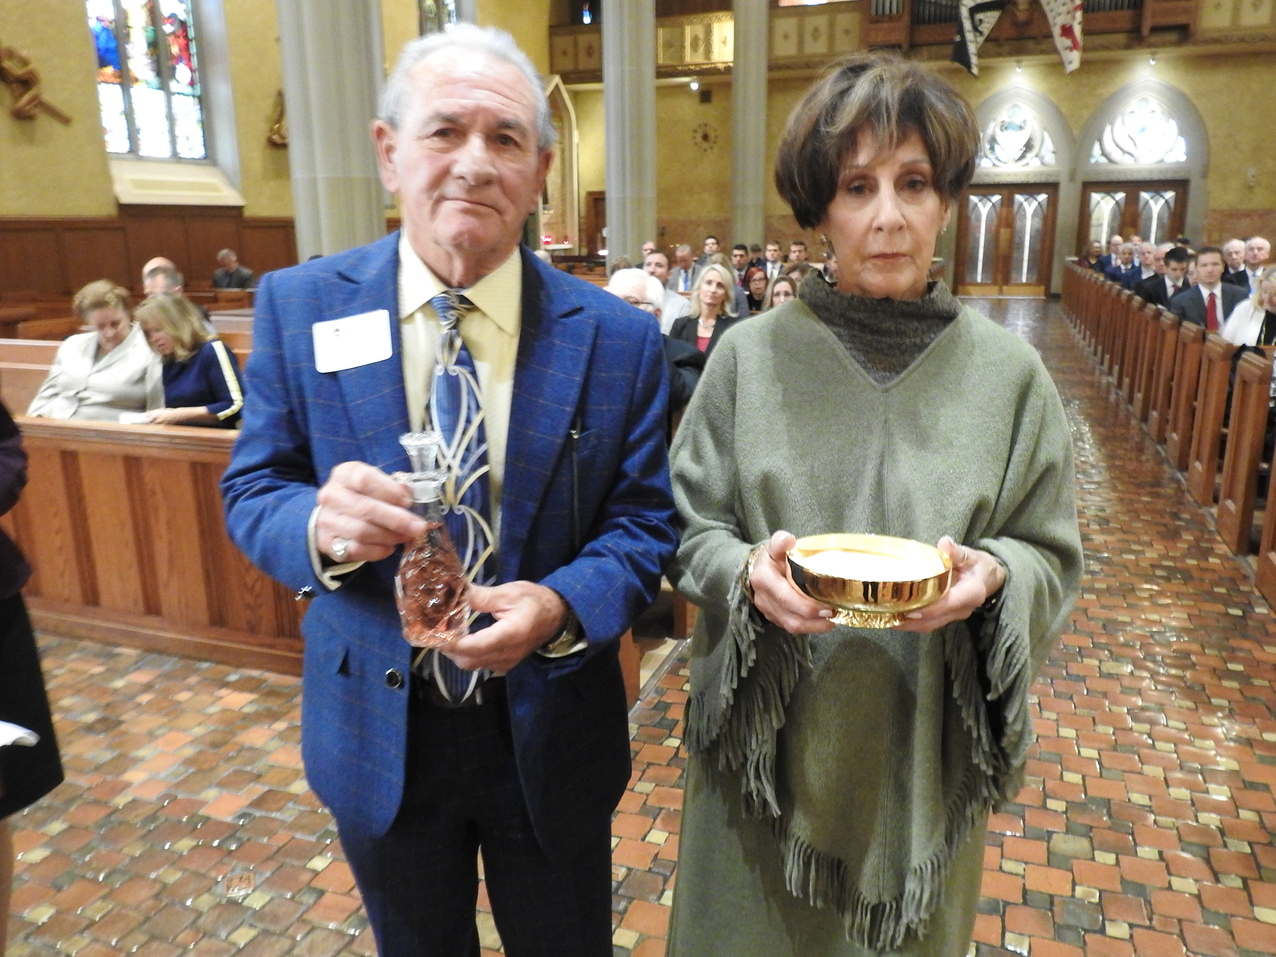 Legal community gathers for annual Red Mass, awards lunch